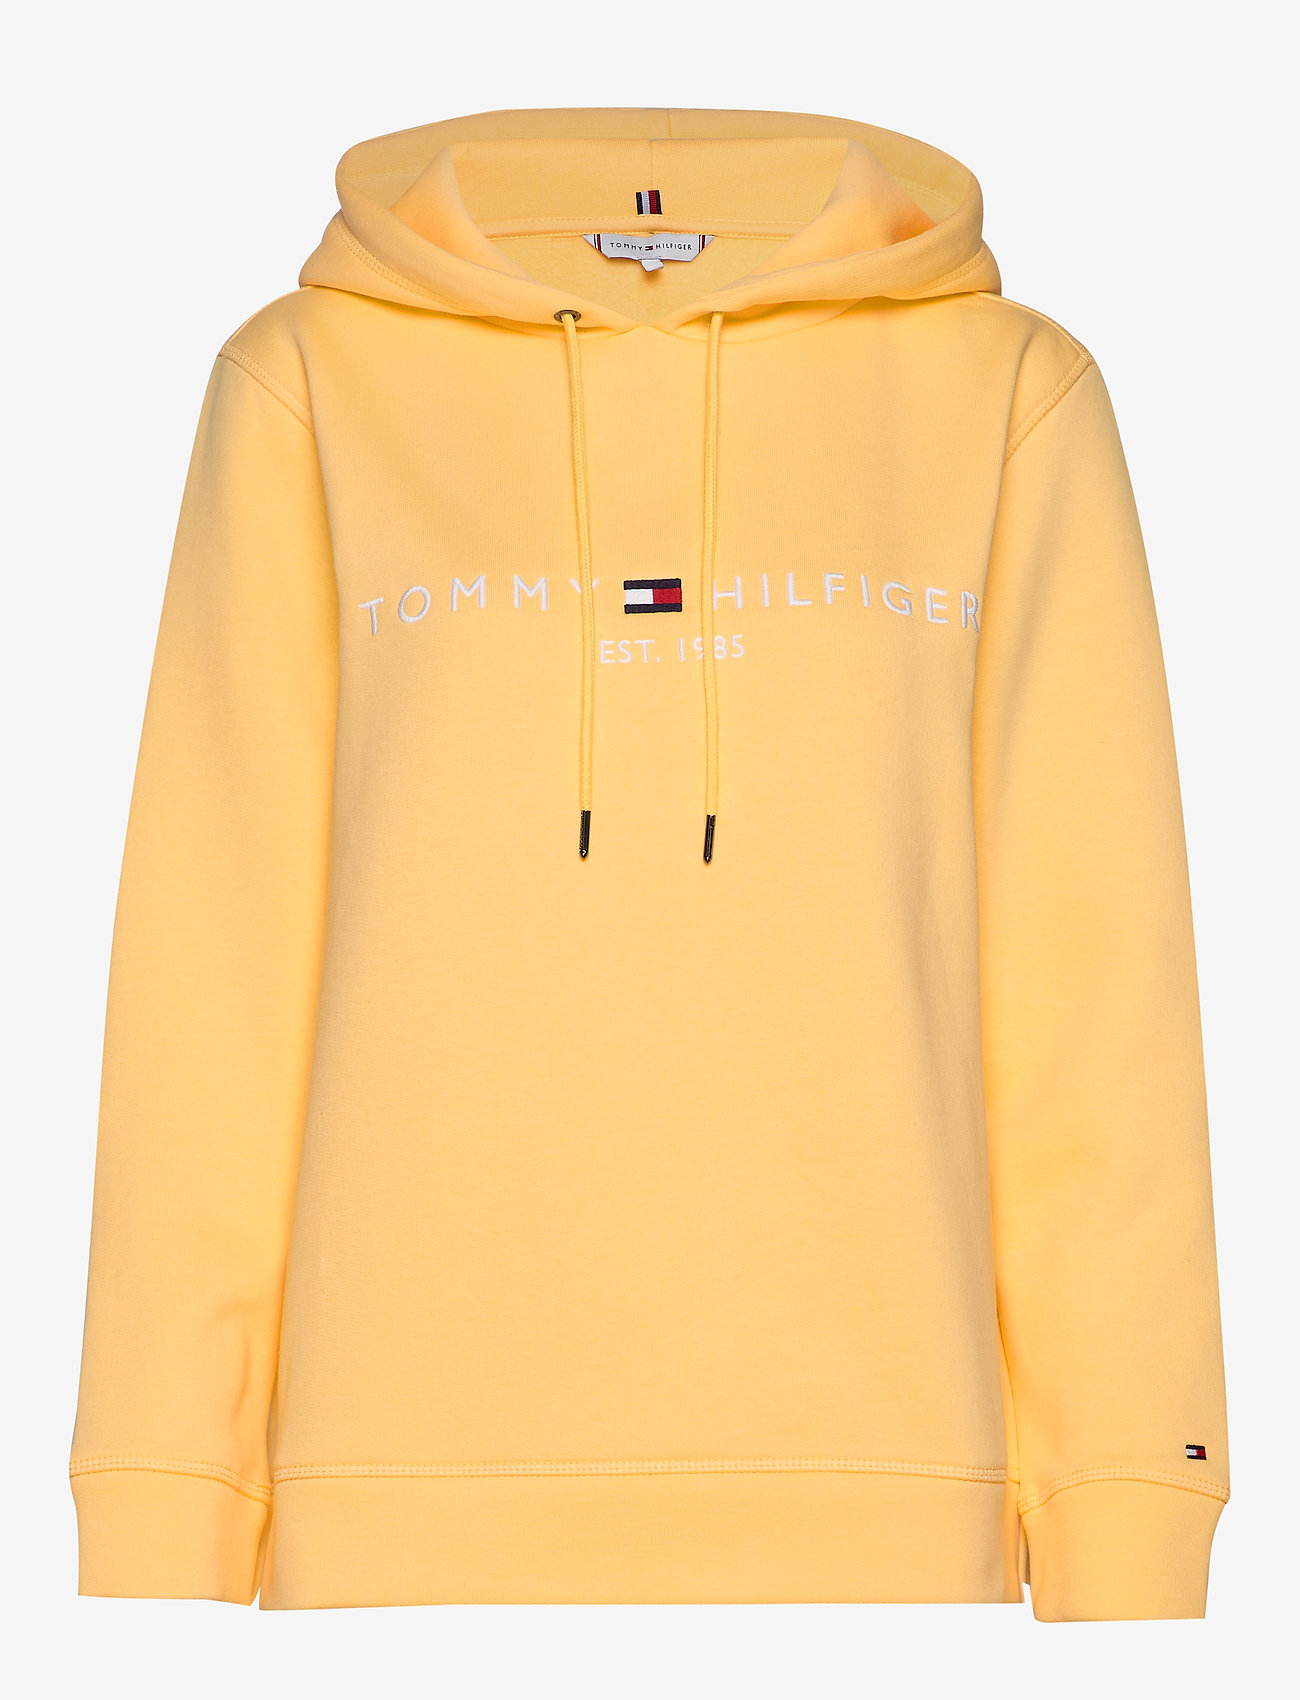 tommy hilfiger yellow hoodie